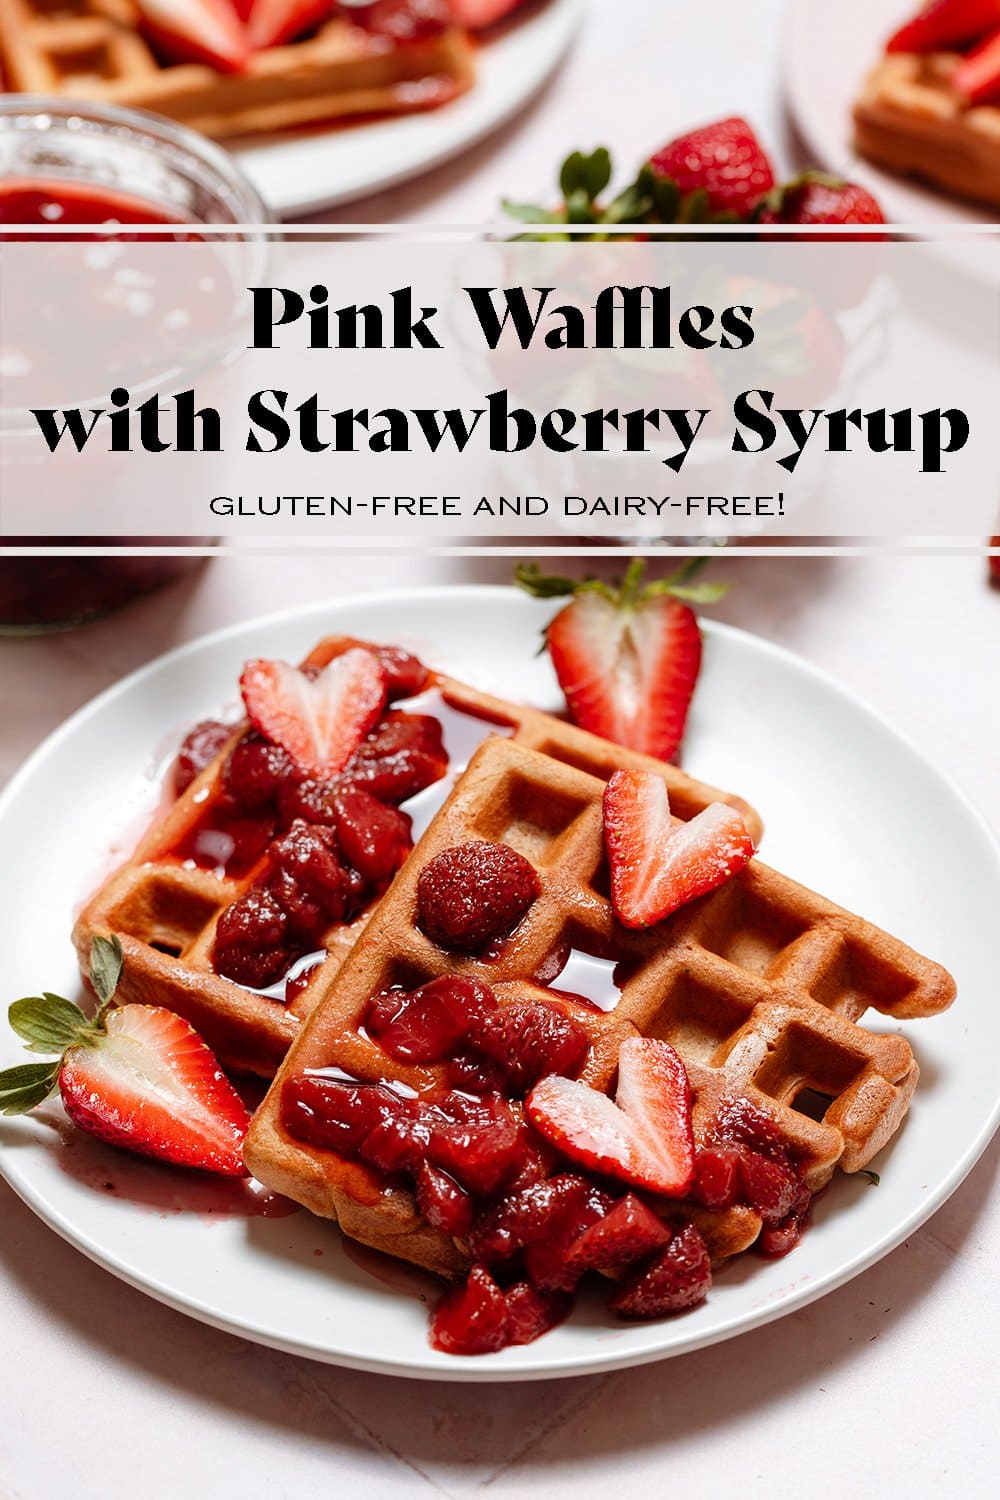 Pink Waffles with Strawberry Syrup